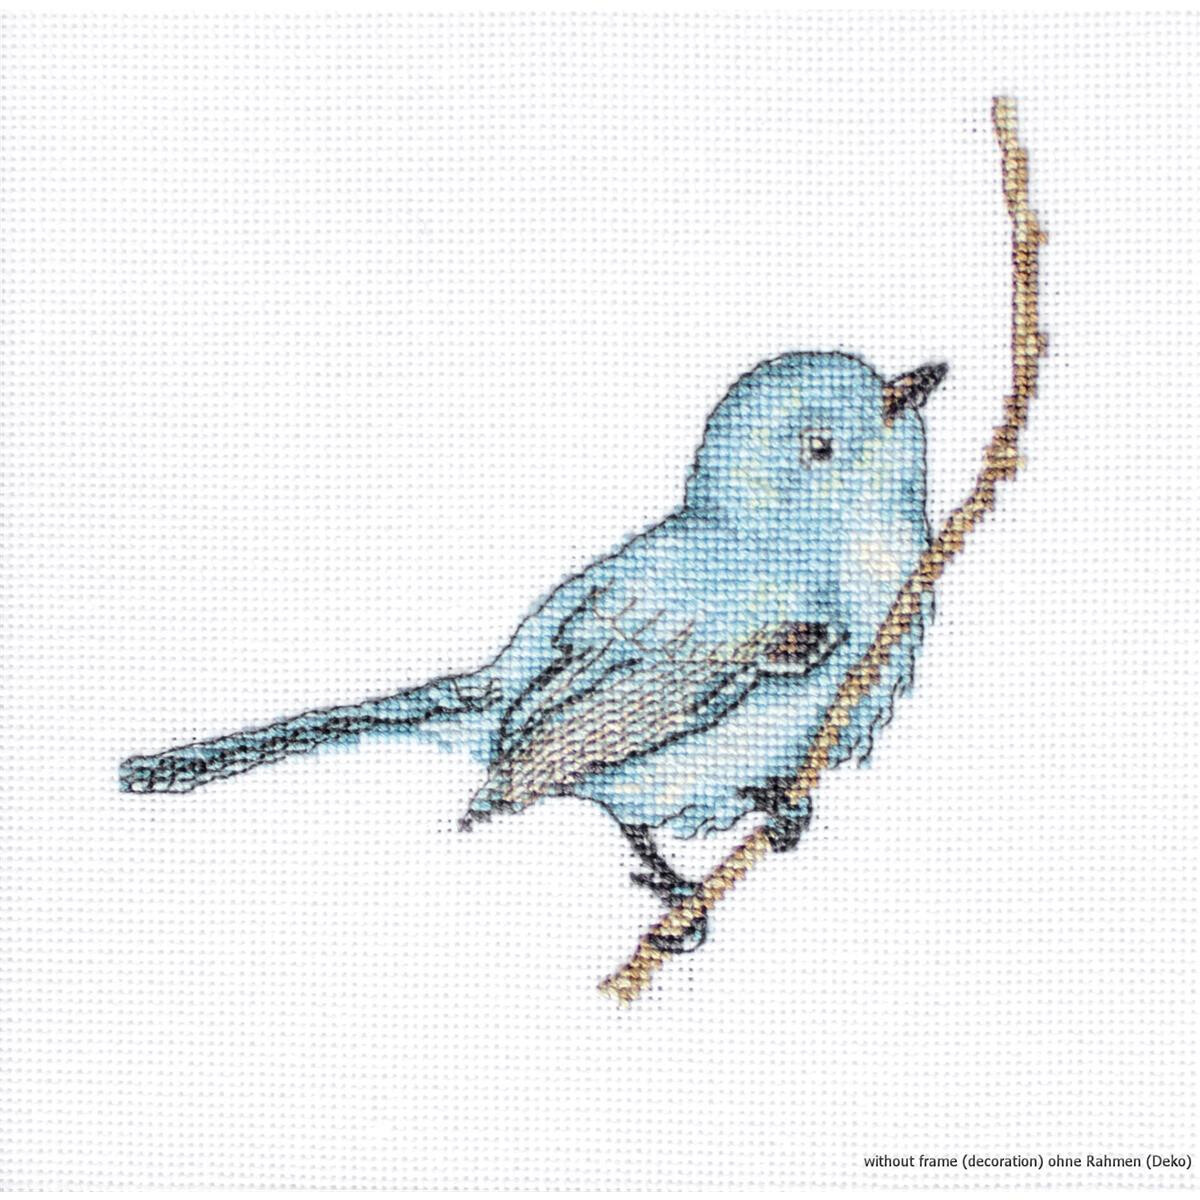 A cross stitch embroidery of a small blue bird sitting on...